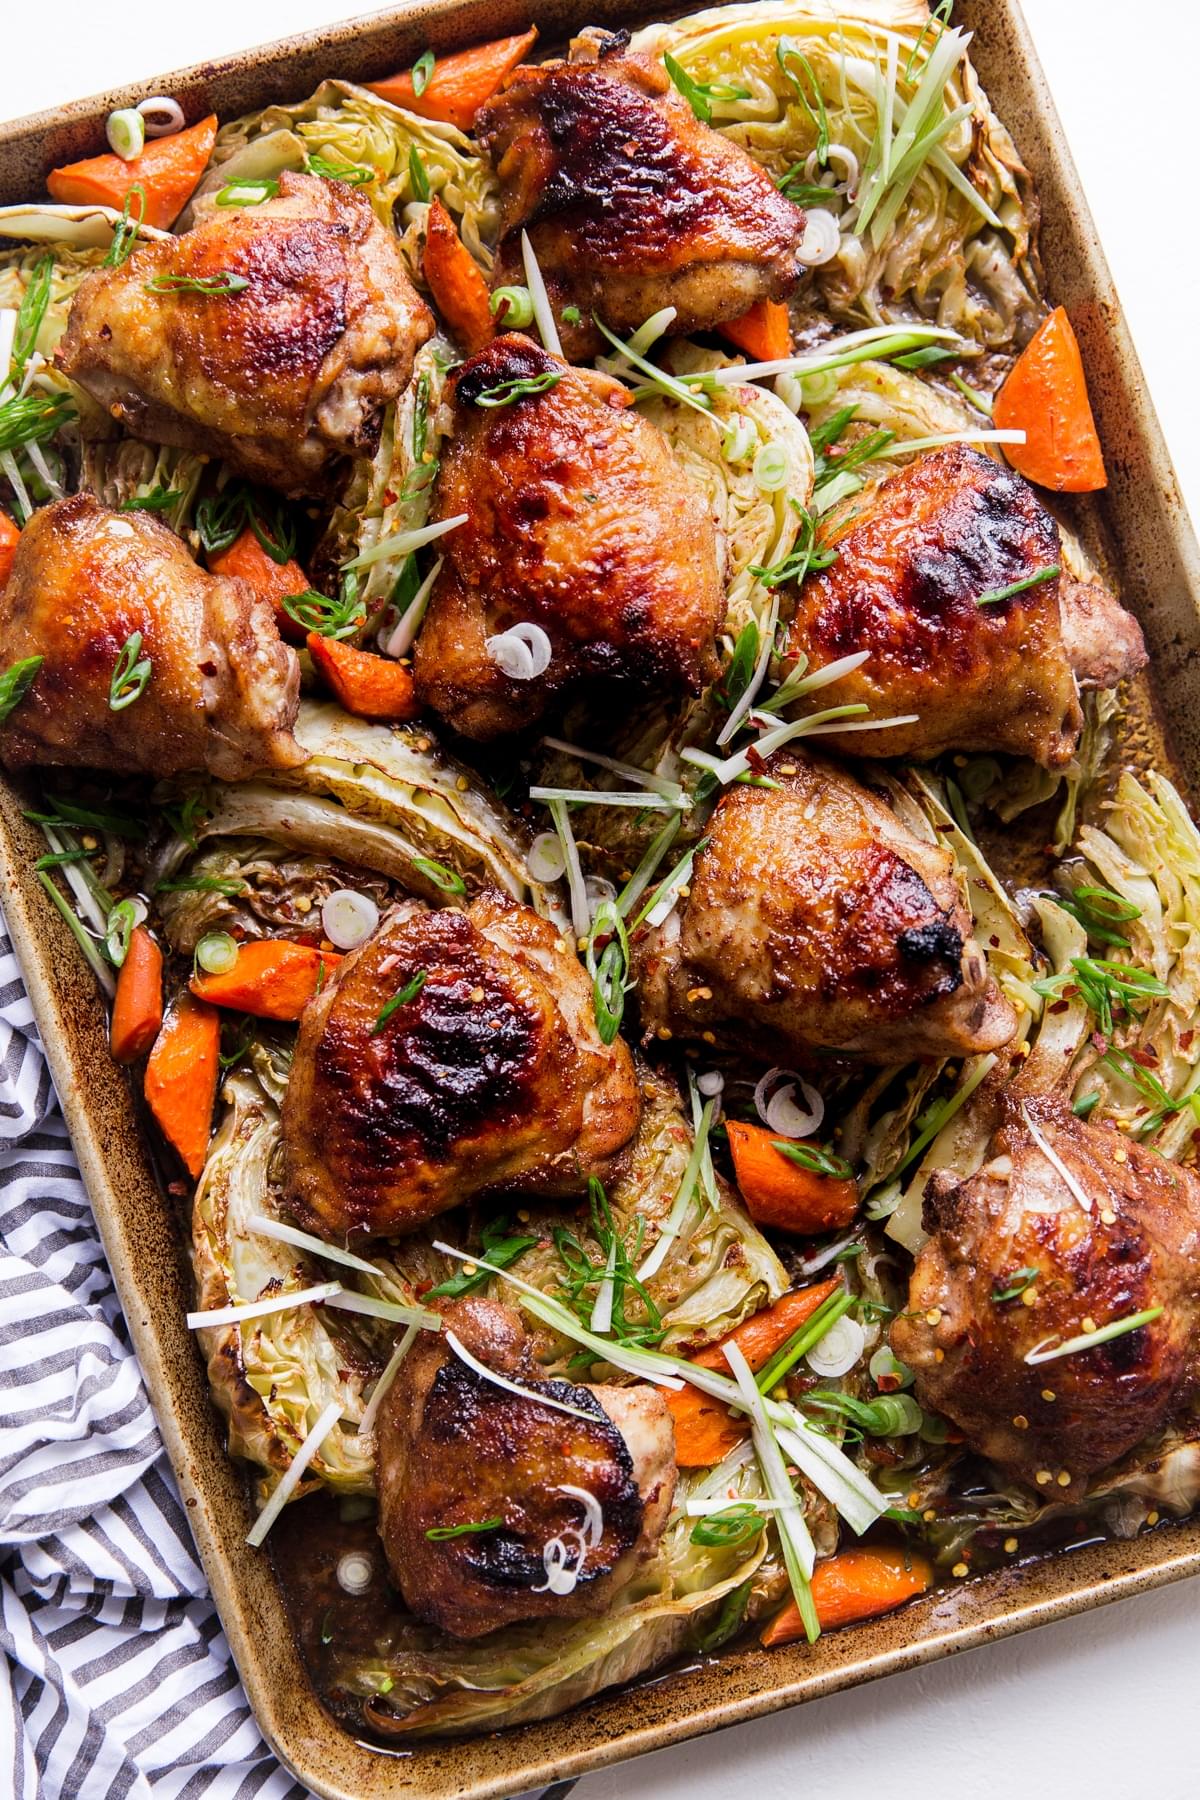 Five Spice Sheet Pan Dinner With Cabbage And Carrots green onions